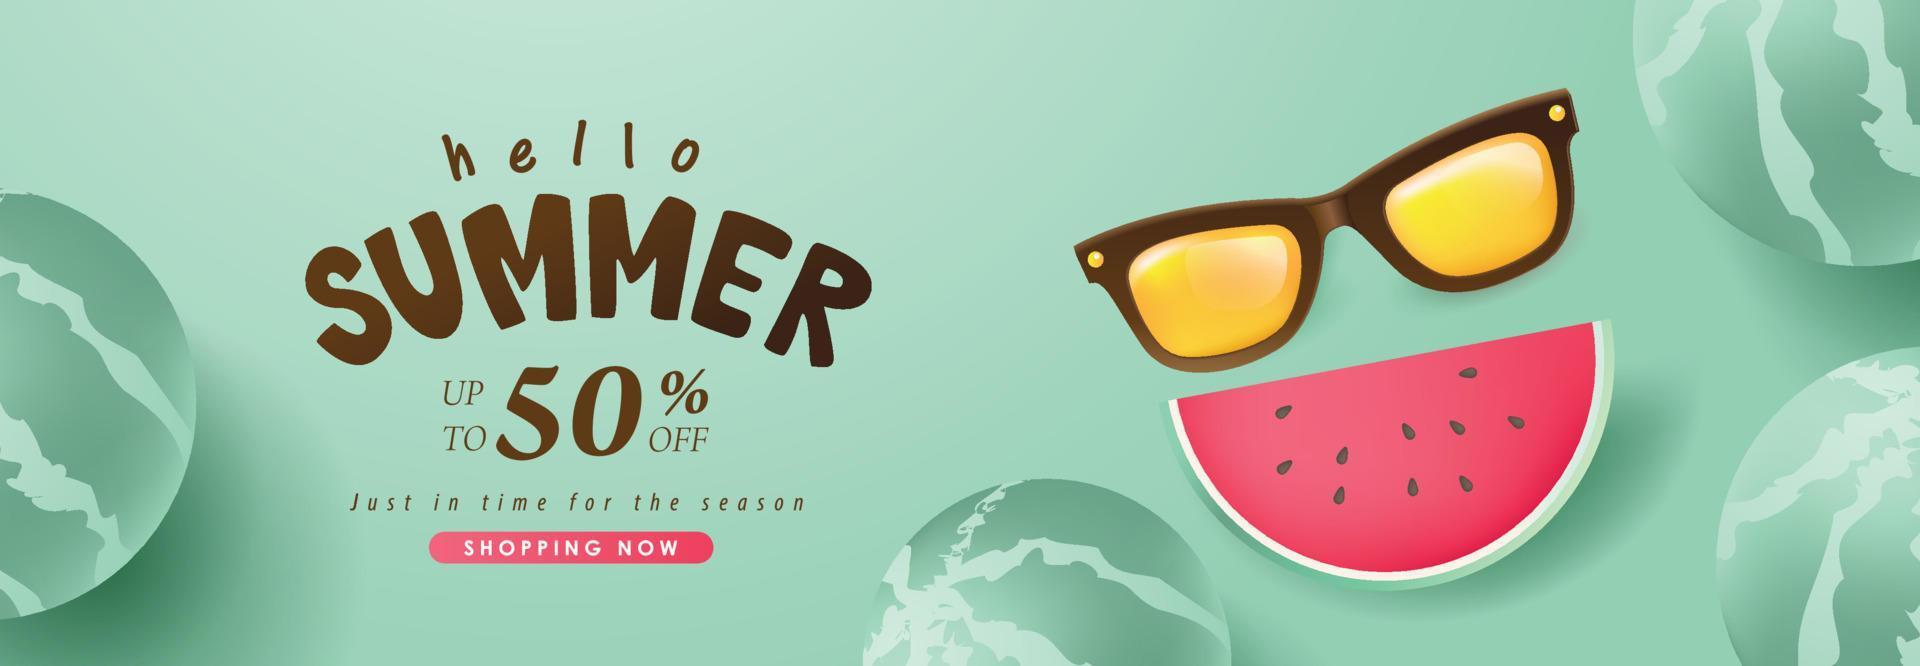 Summer sale banner background with funny watermelon decorate vector